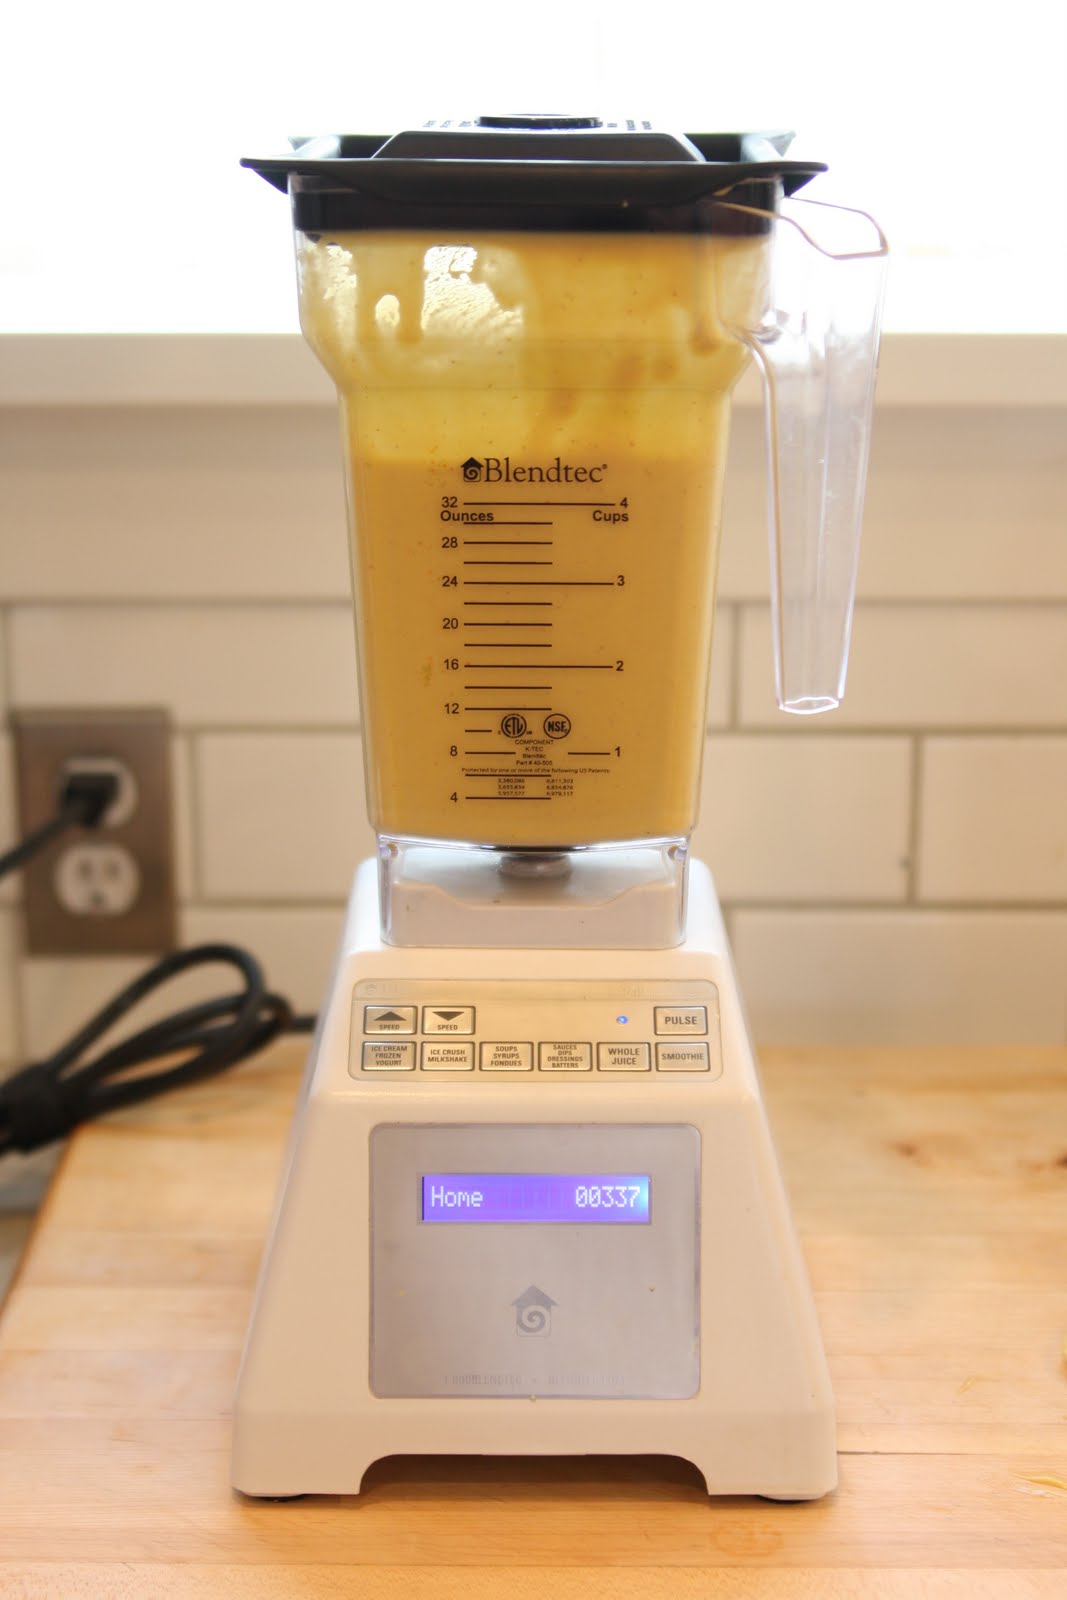 FREE ELECTRIC MIXER ALERT! 🤯 - Bloom Nutrition